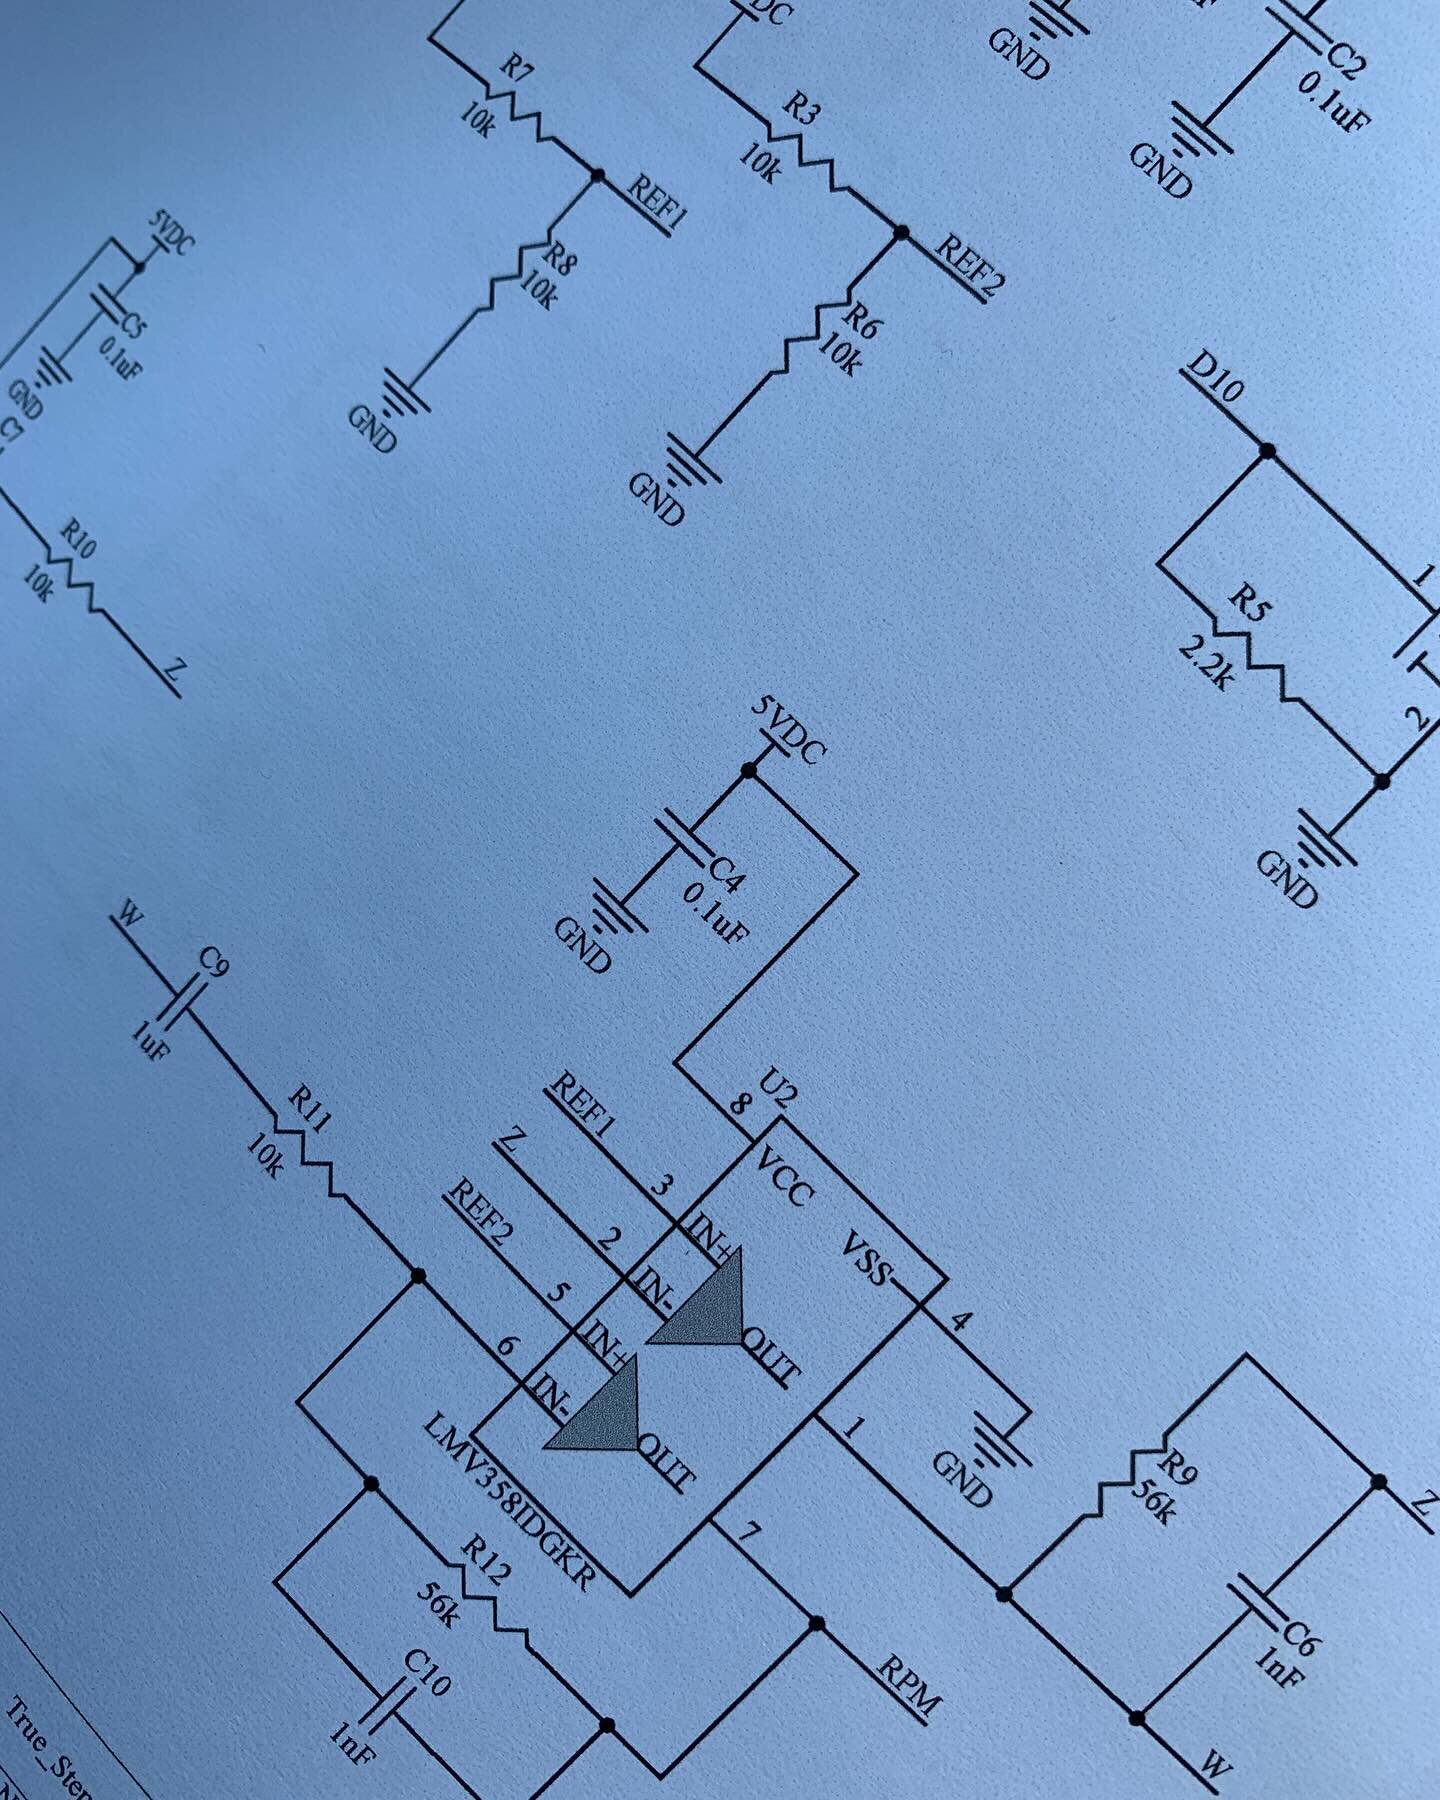 Continuously looking at new products to create for the market. Step 1 is the schematic design for the circuit board! #rpm #altium #schematics #nevernotworking